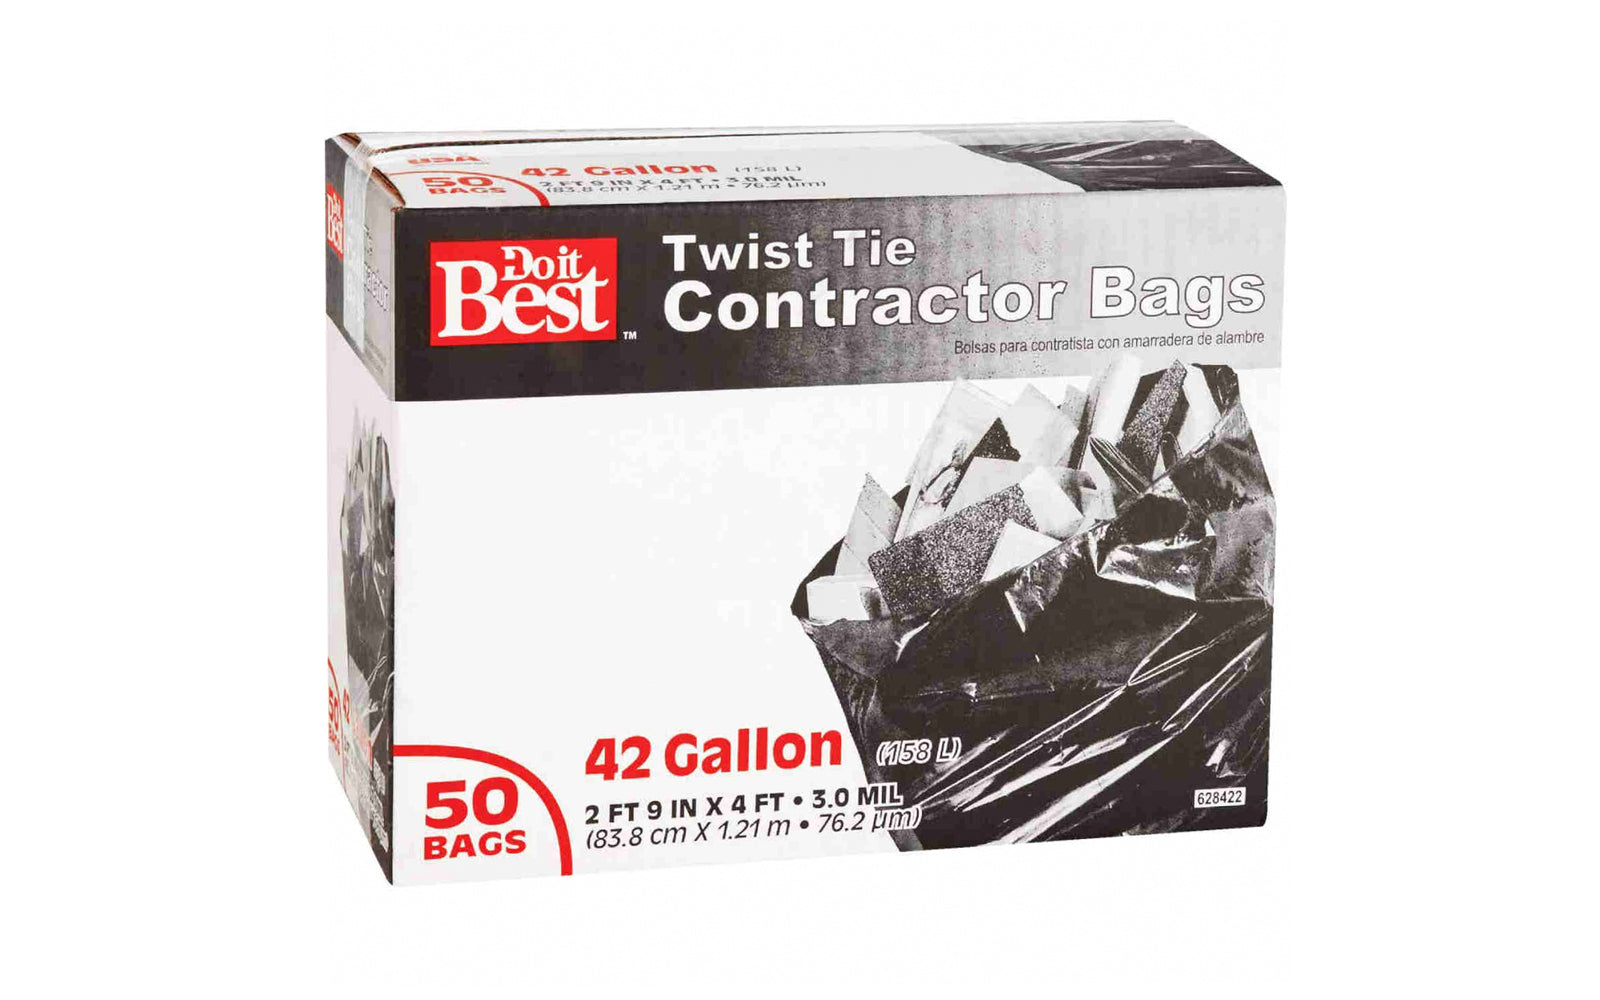 42 Gallon Twist Tie Contractor Bags. Contractor 42 Gal. bags with twist tie closure. 3.0 mil. 33" Wide x 48" High. Black color plastic trash bags. Sold as 50 bags in a box. Contractor bags made in USA. Do It Best Black Contractor Bags. 628422. 009326605913. 50 Bags